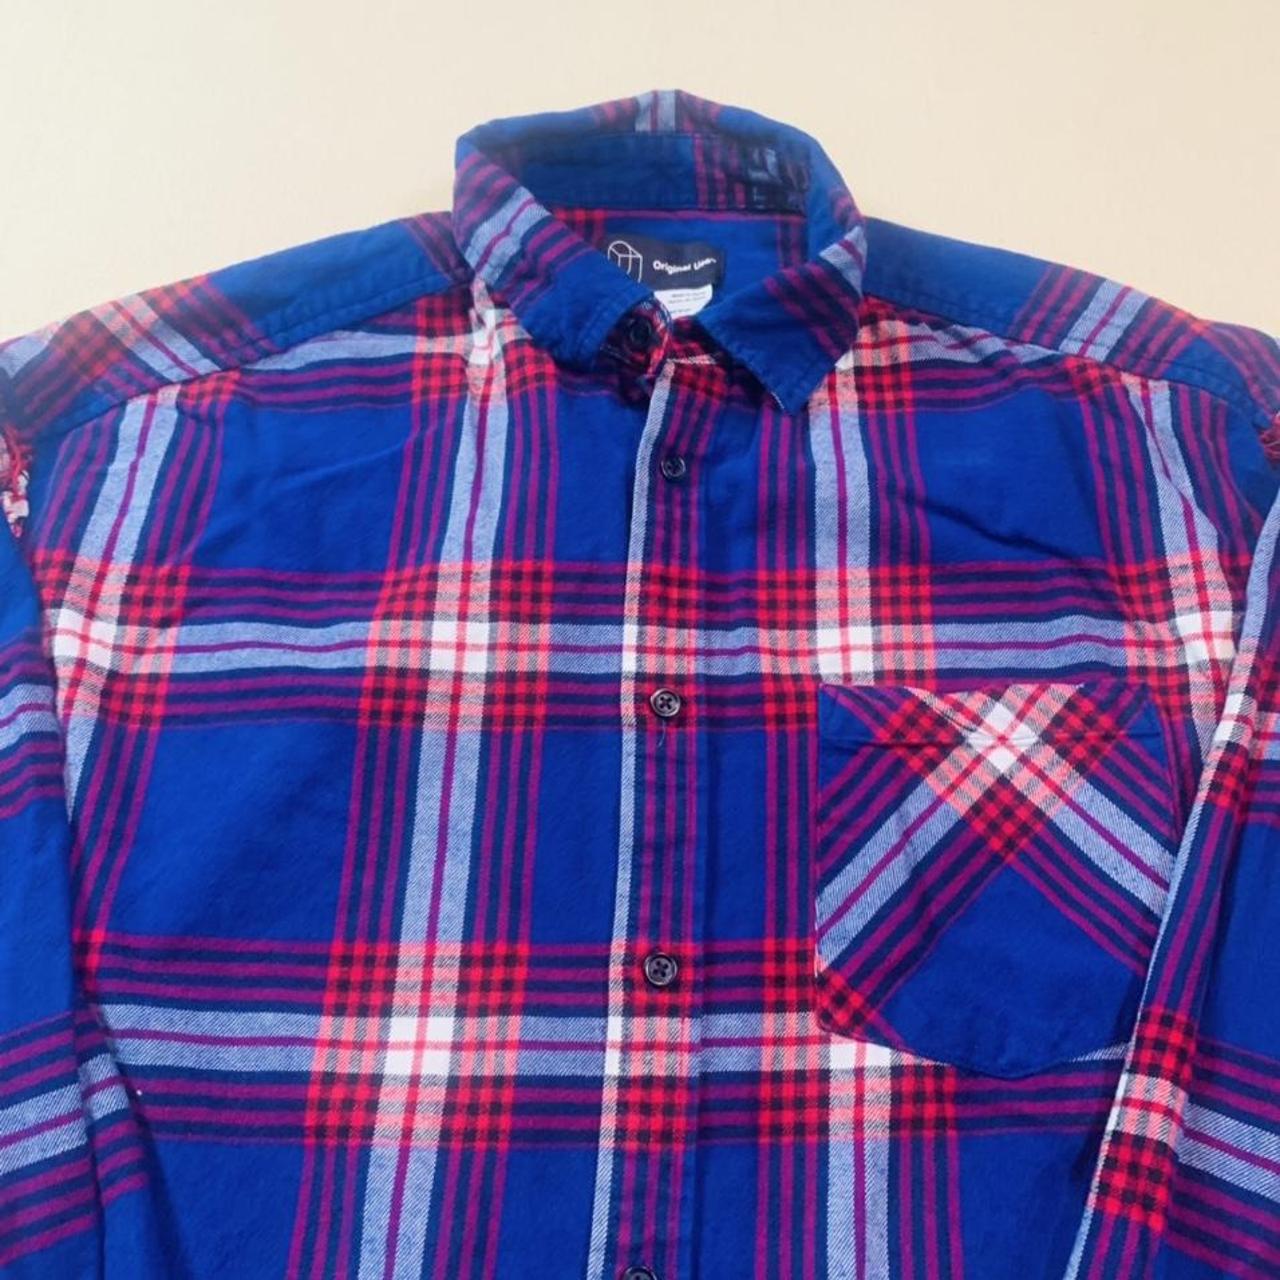 Product Image 2 - Blue and Red Plaid longline